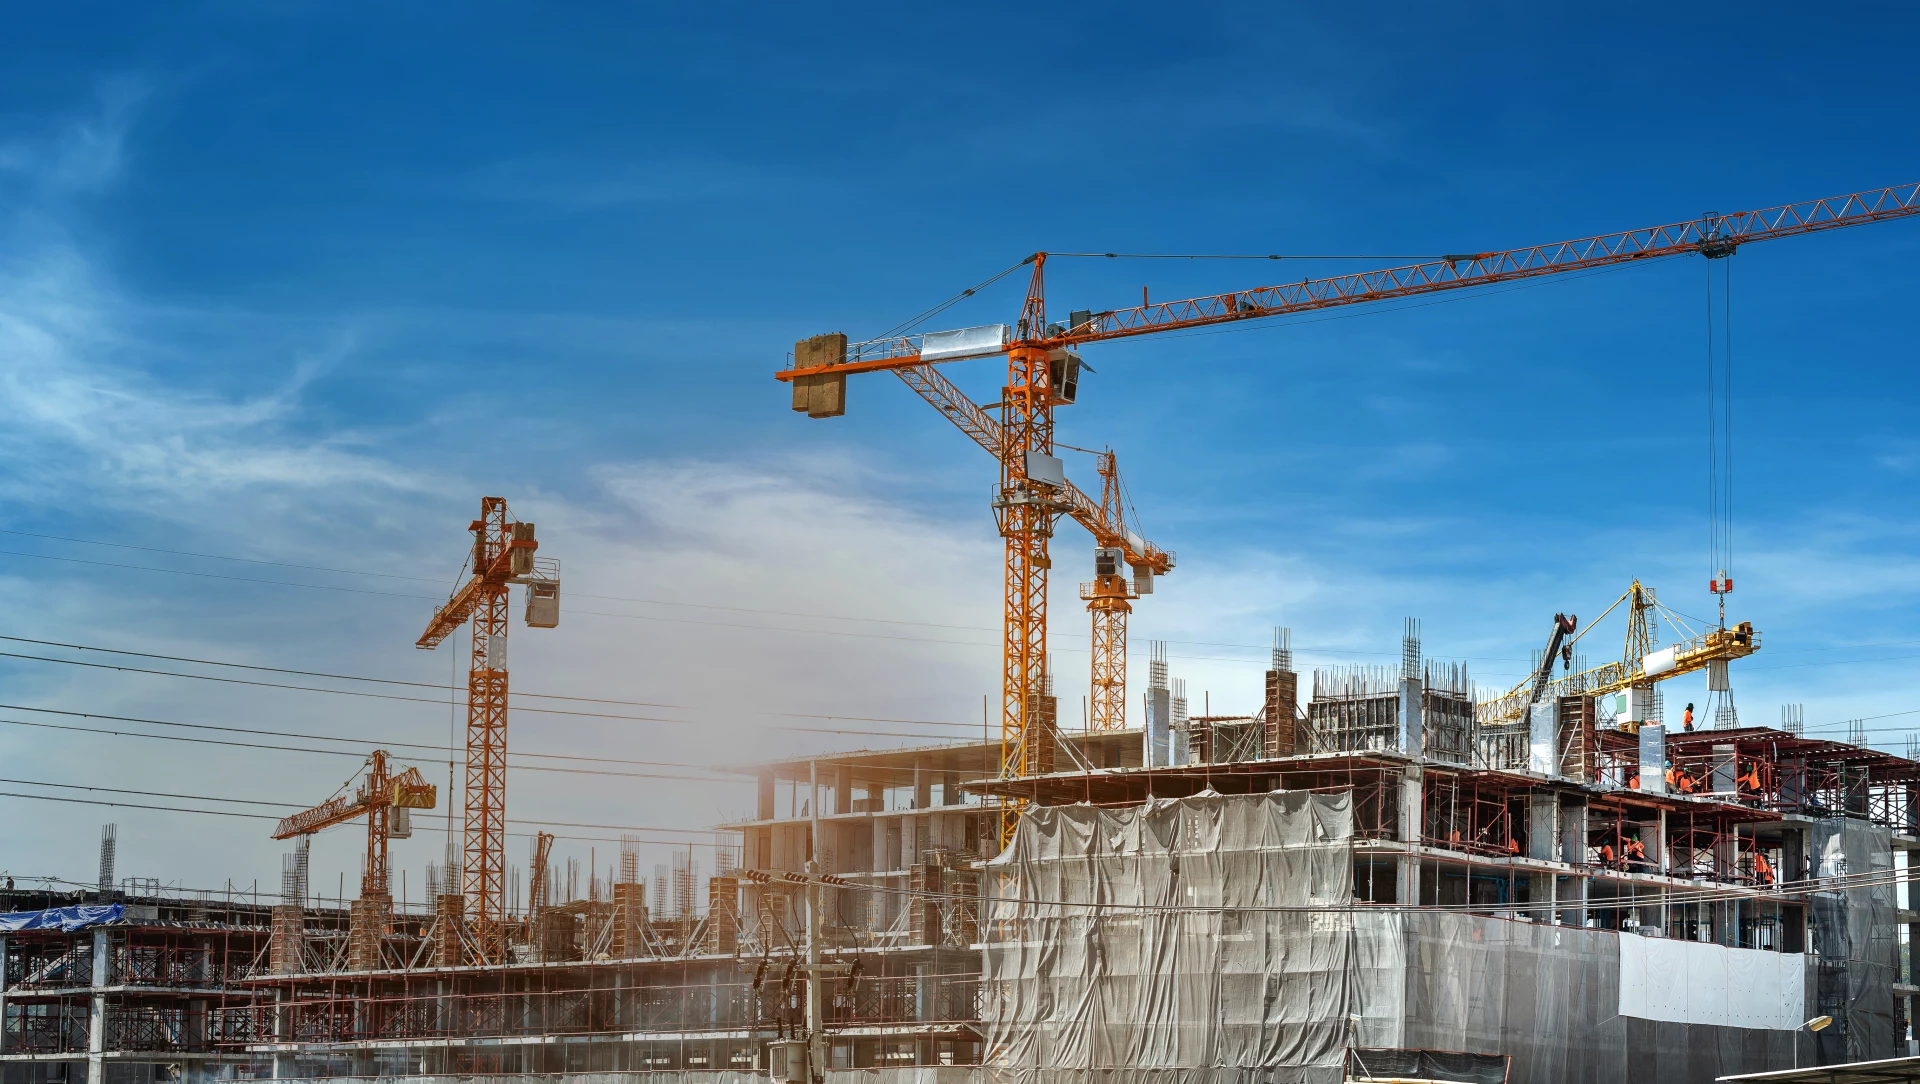 org-iot-for-reducing-risks-in-construction-sites.jpg